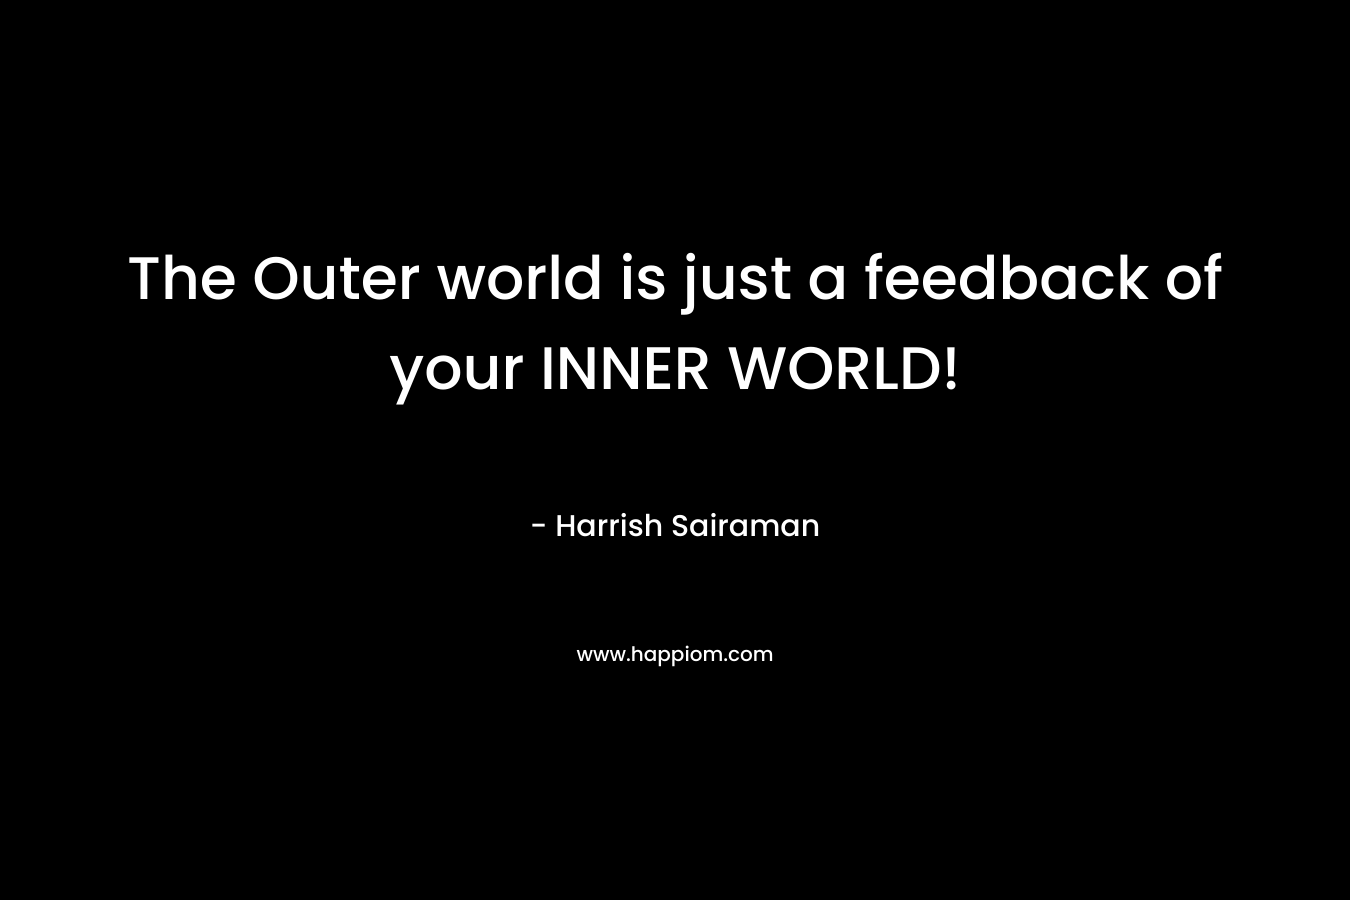 The Outer world is just a feedback of your INNER WORLD! – Harrish Sairaman